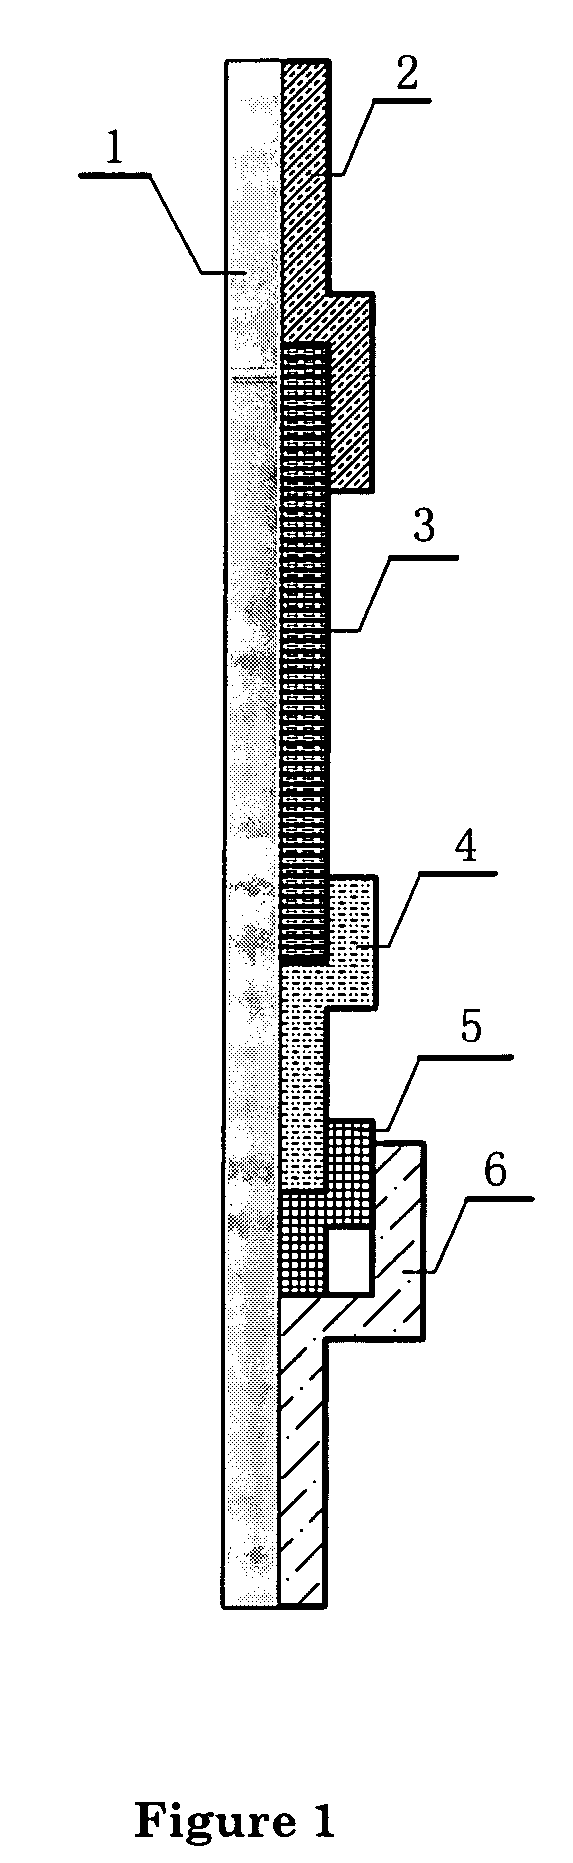 Apparatus and methods for steroid hormone testing